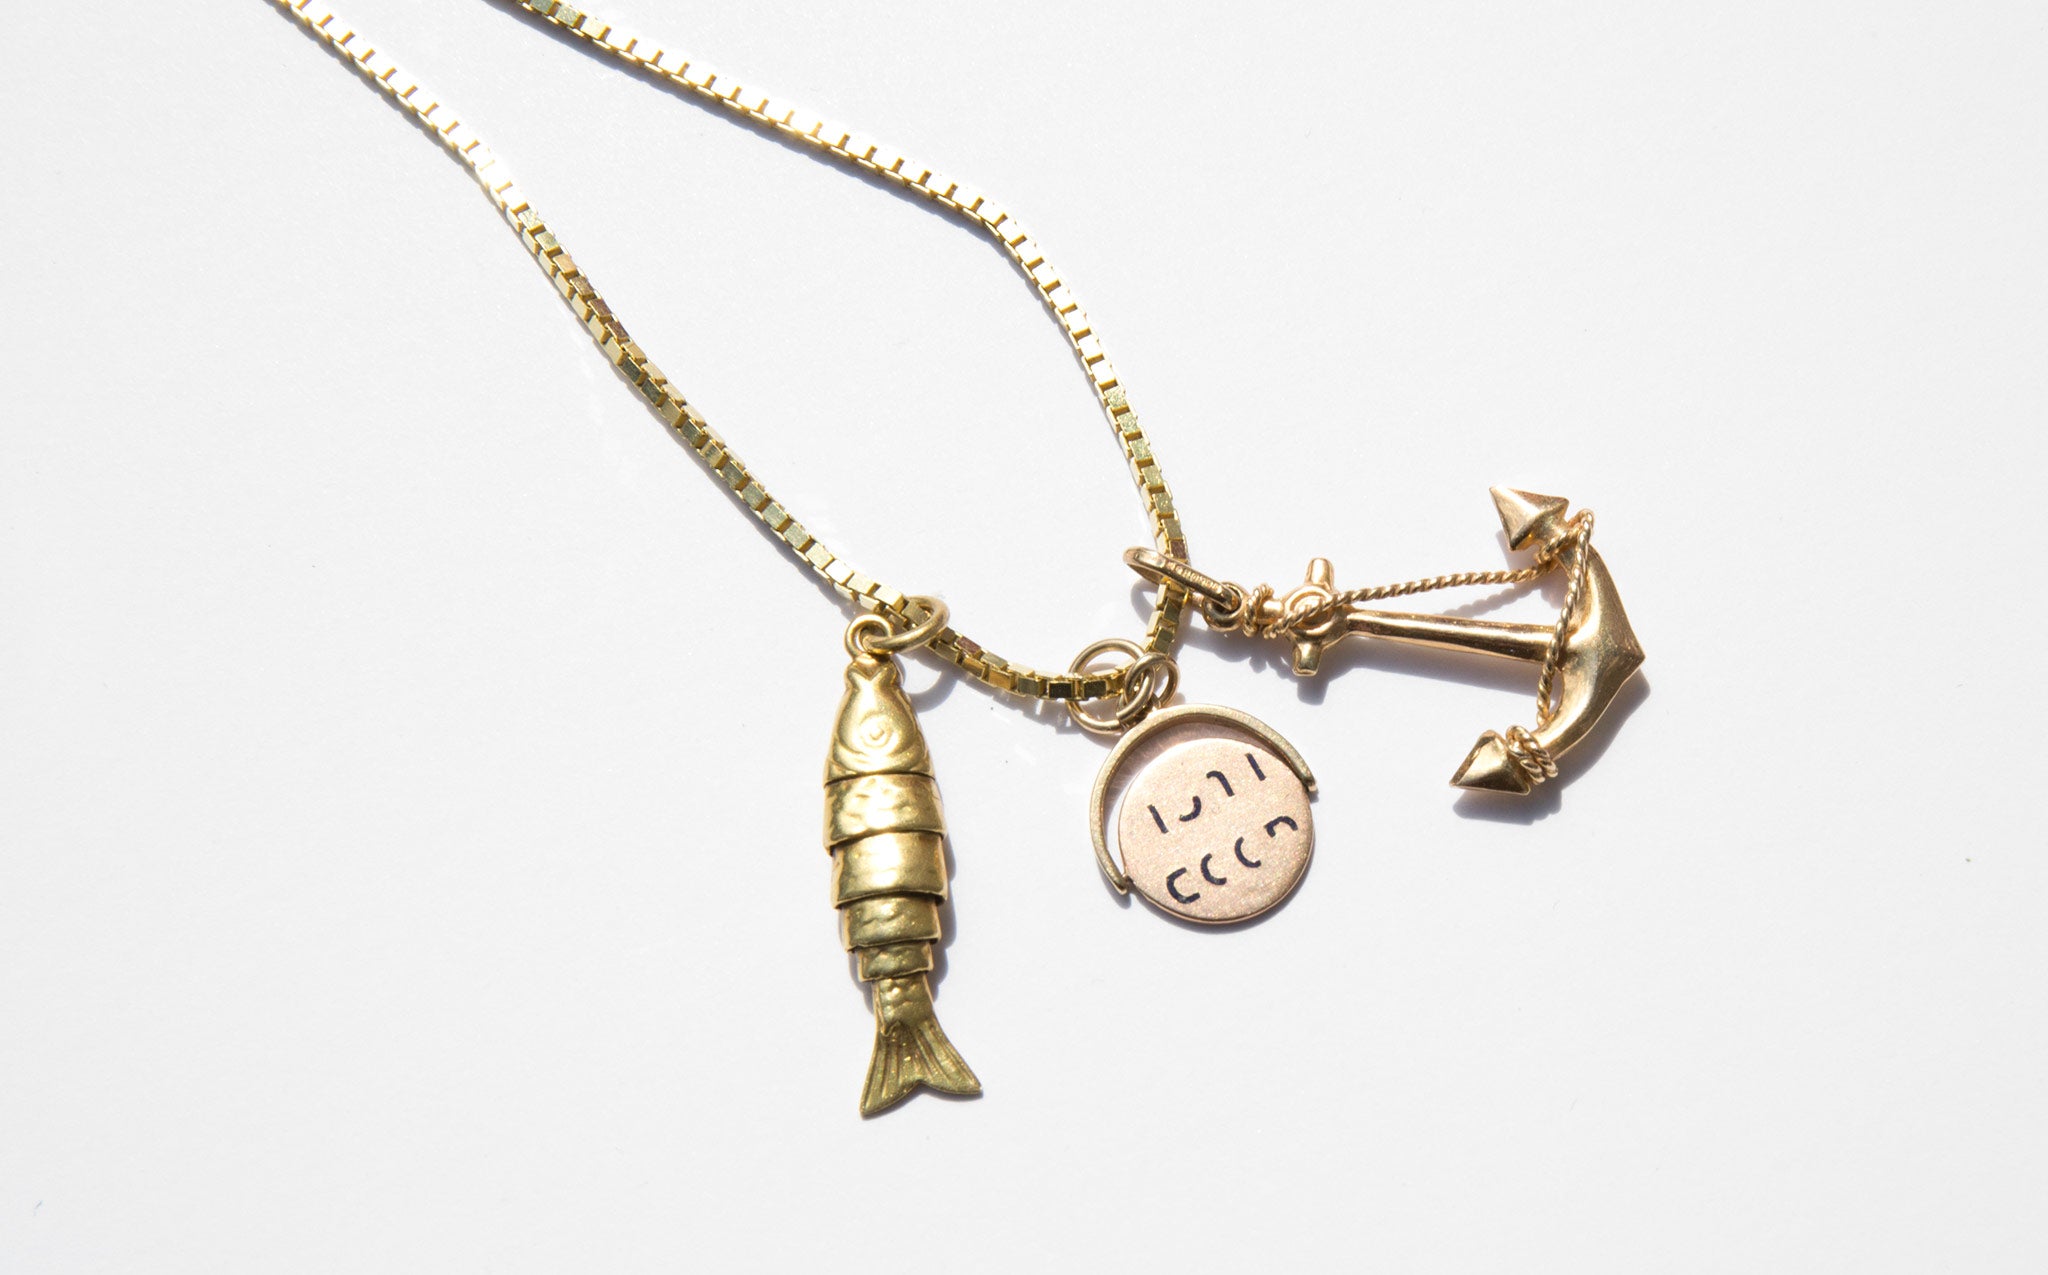 Traveler's Luck Charm Necklace